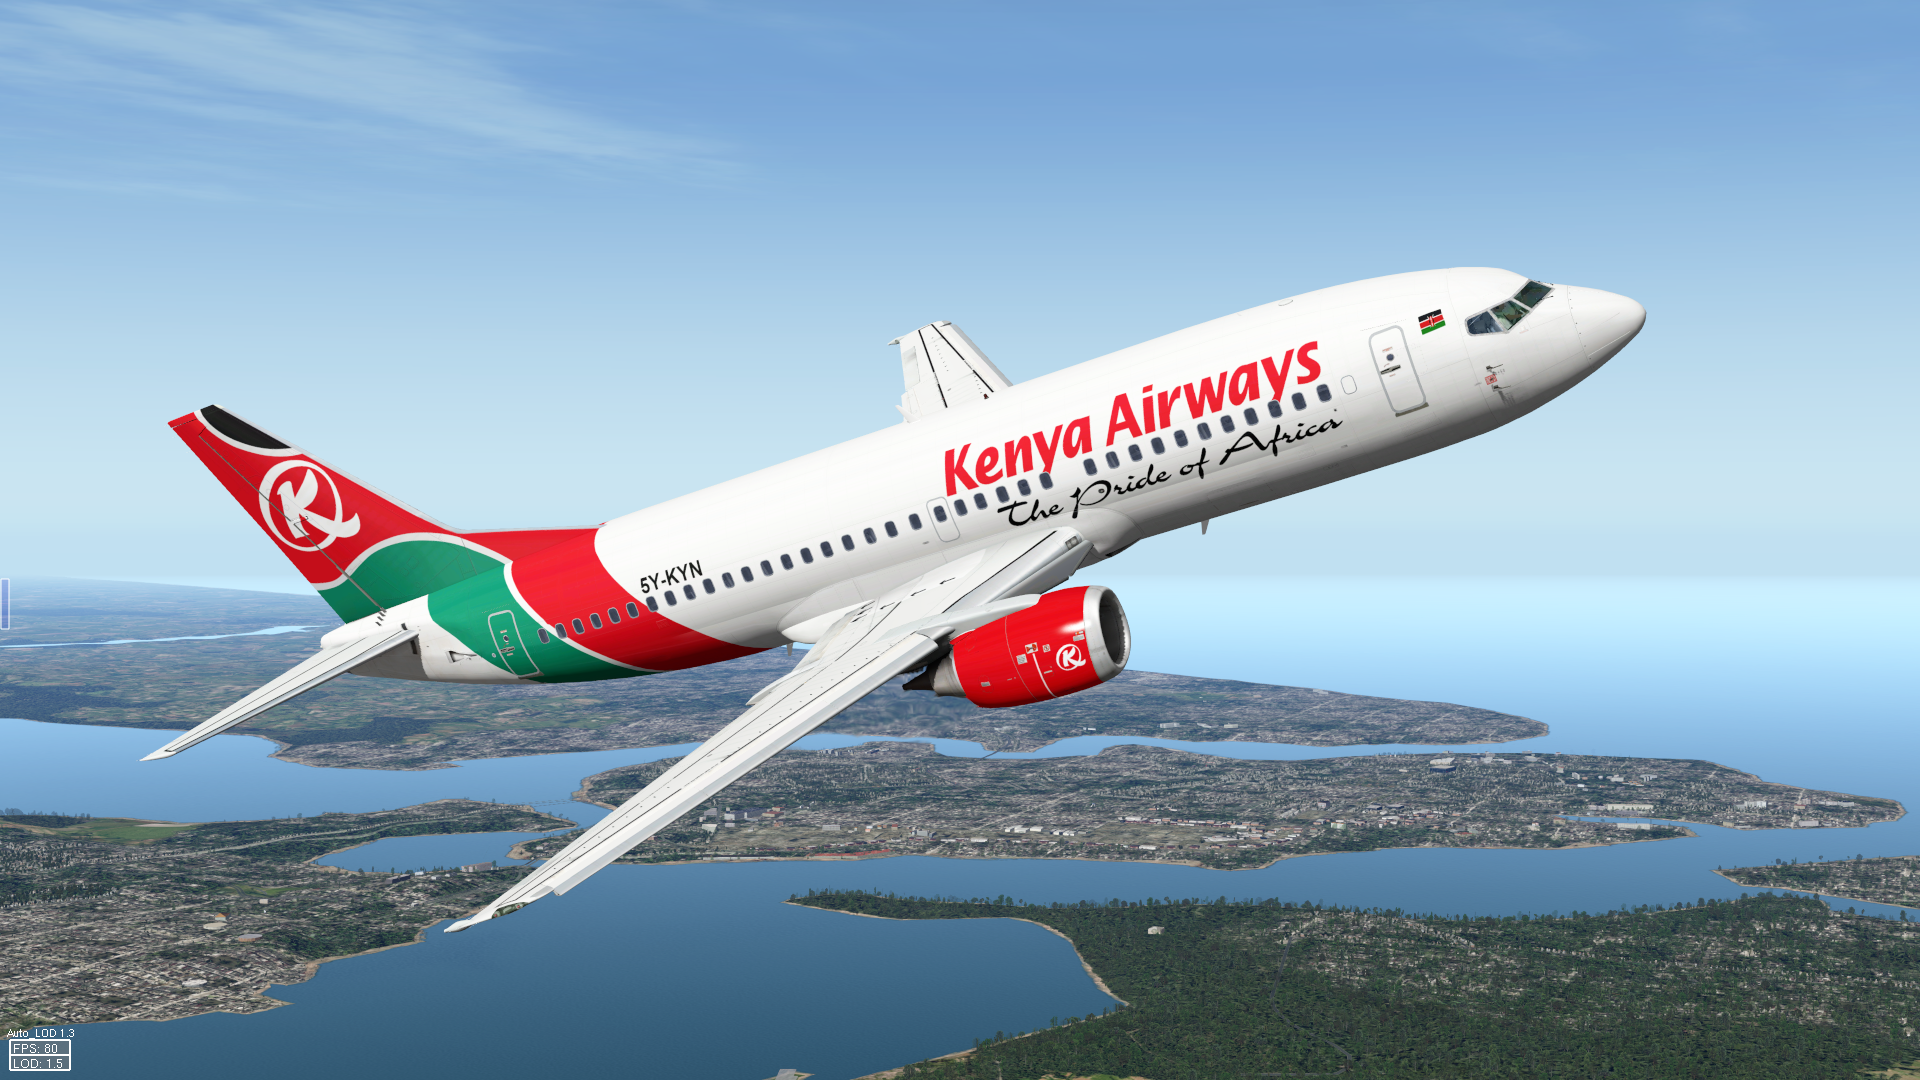 Delta Airlines Announces New Codeshare Deal With Kenya Airways